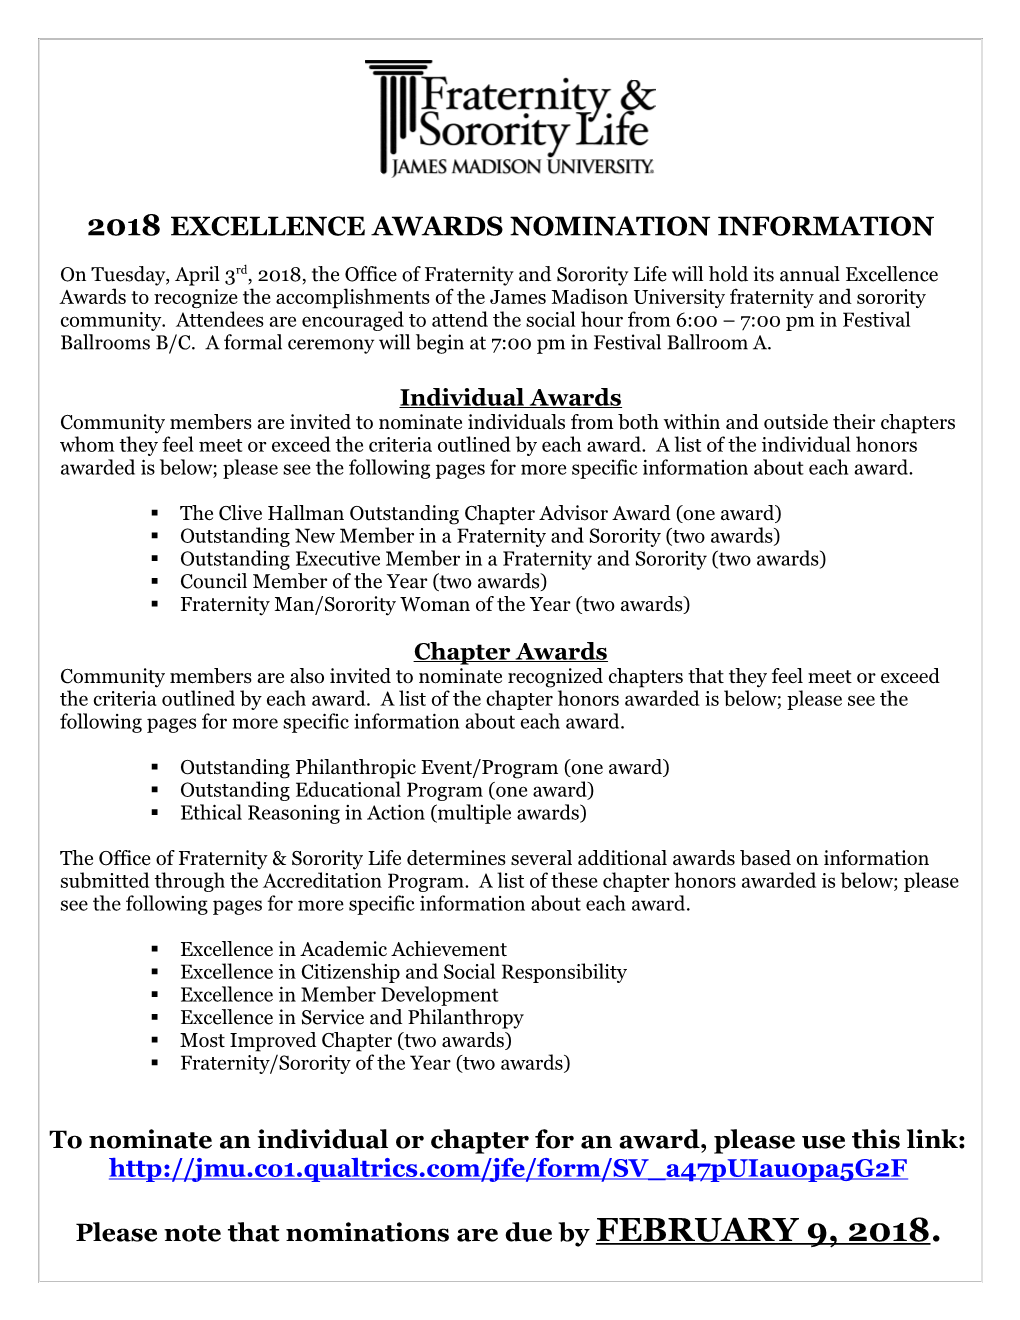 2018Excellence Awards Nomination Information